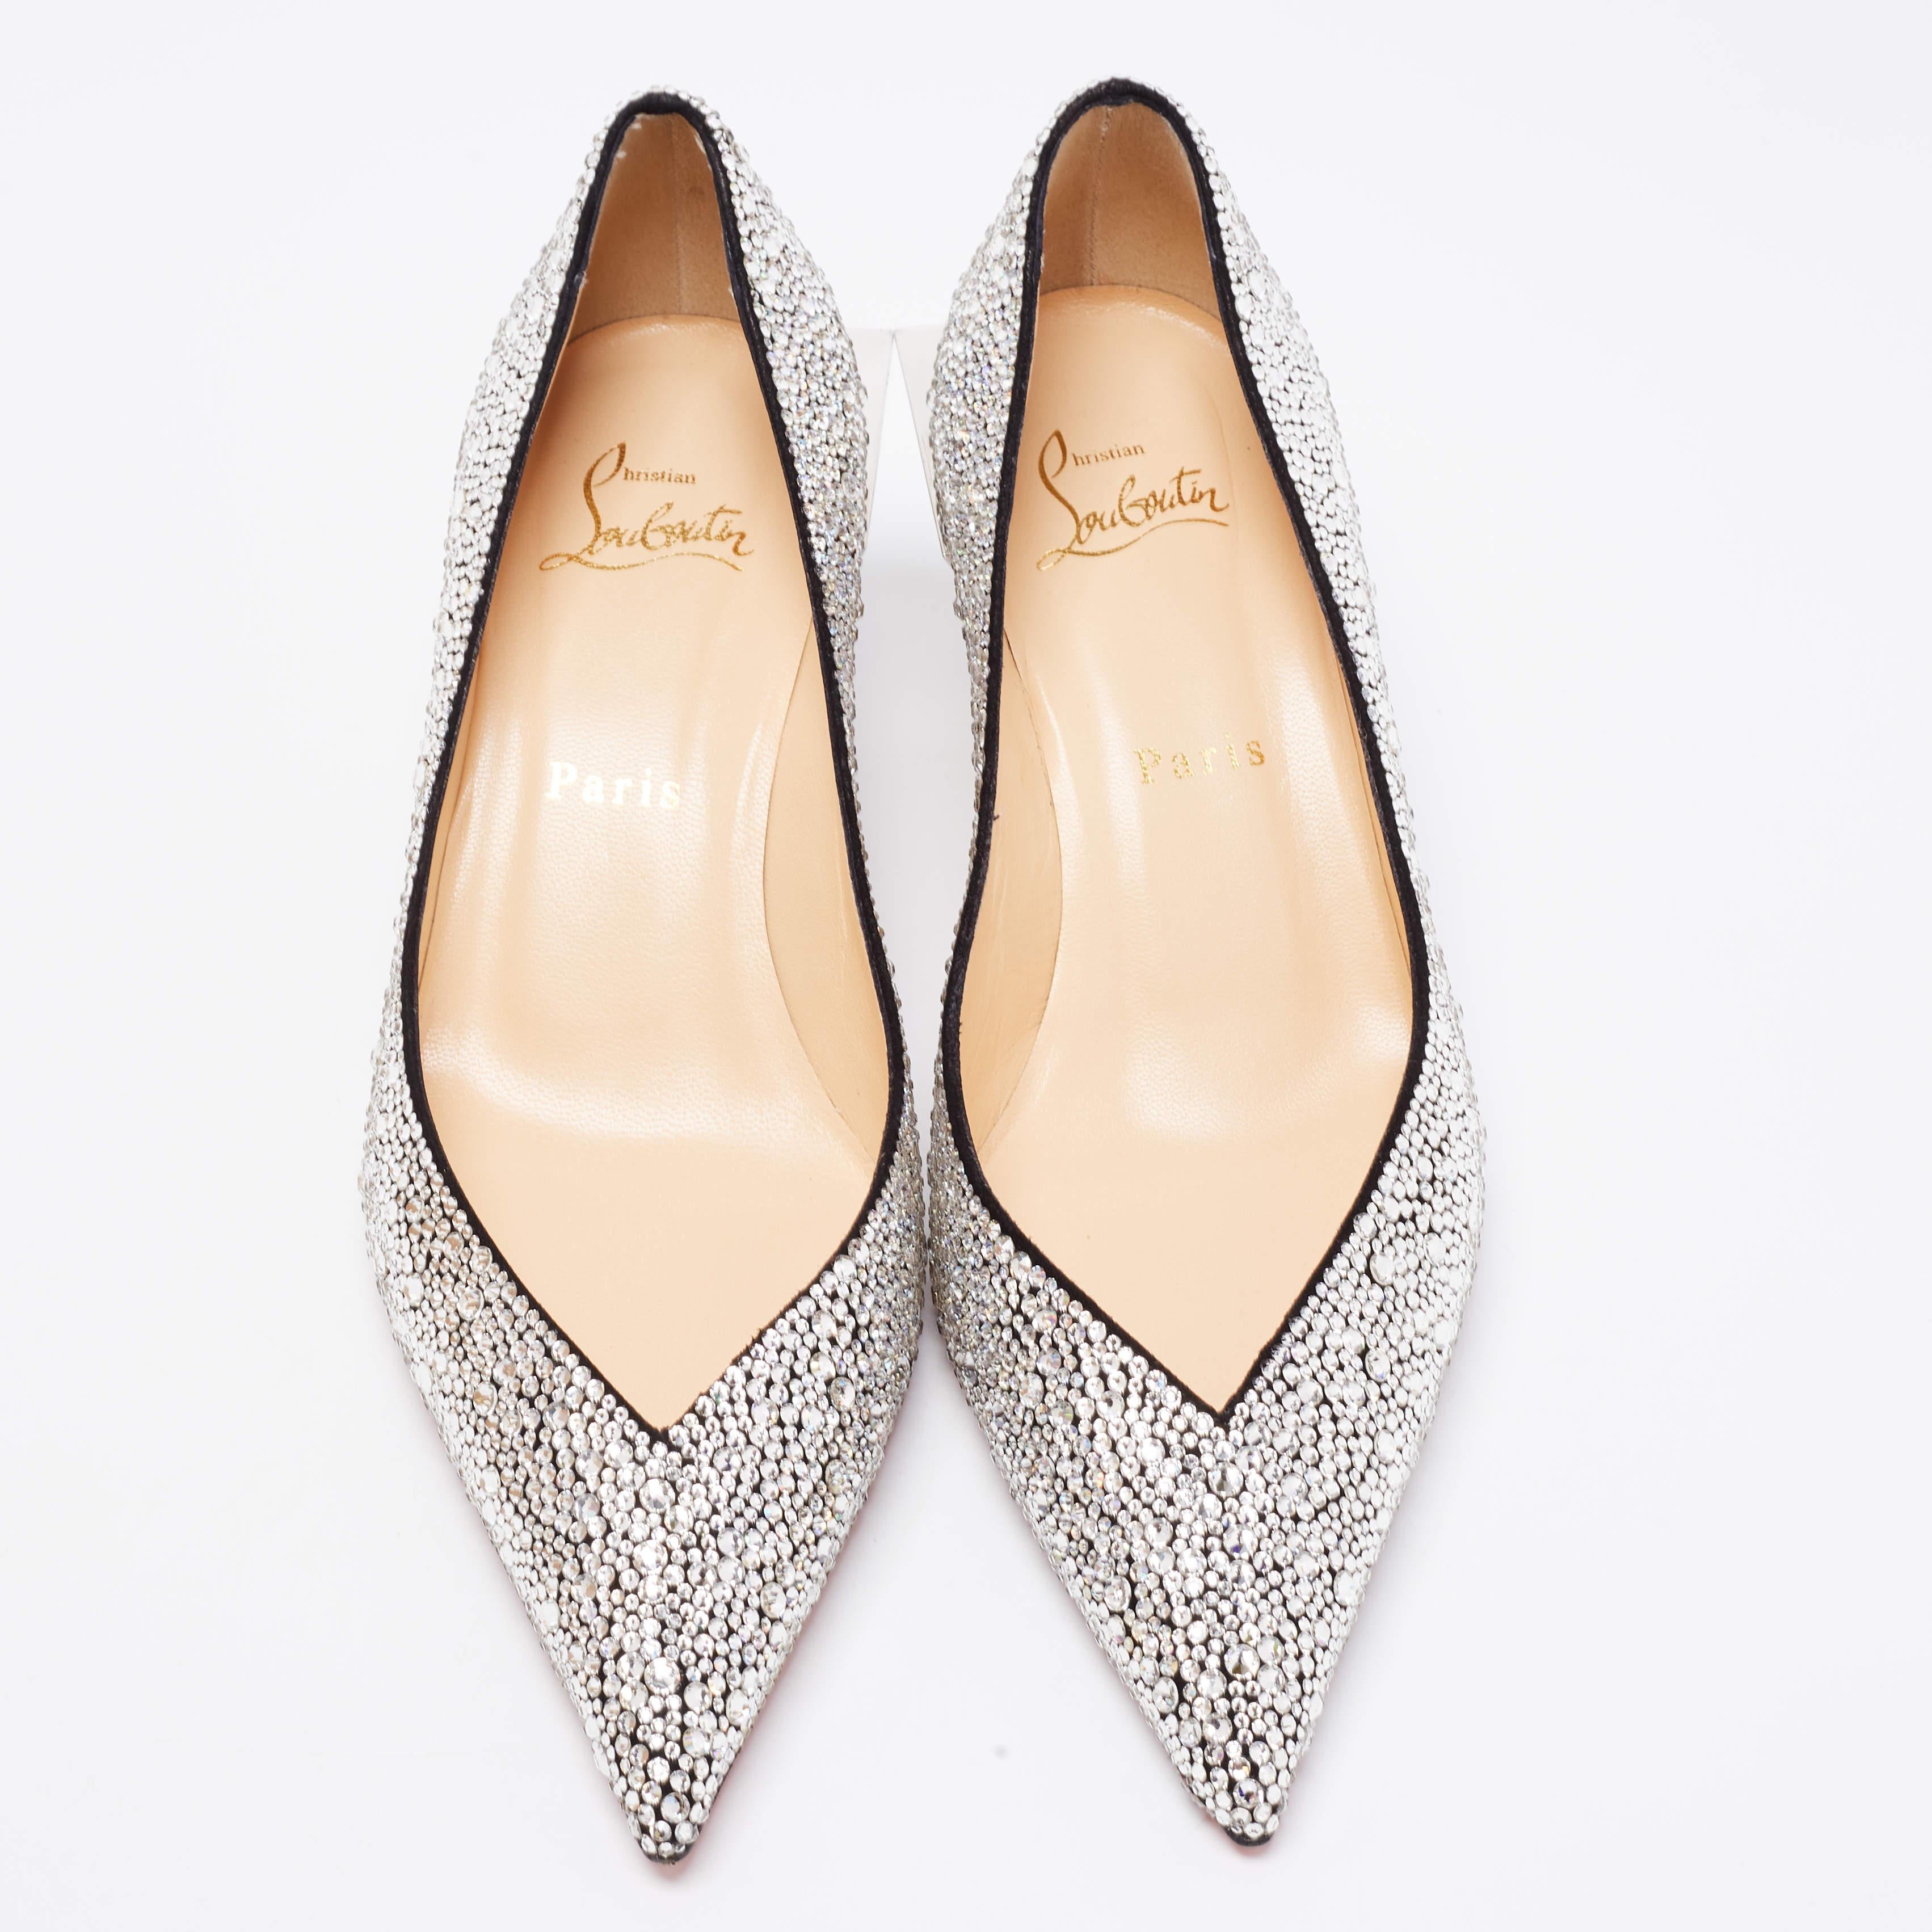 These Christian Louboutin pumps are a great choice if you’re looking to add a pair that's glamorous and comfortable. The pair has been made in Italy from embellished suede and set on 7 cm heels.

Includes: Original Box

